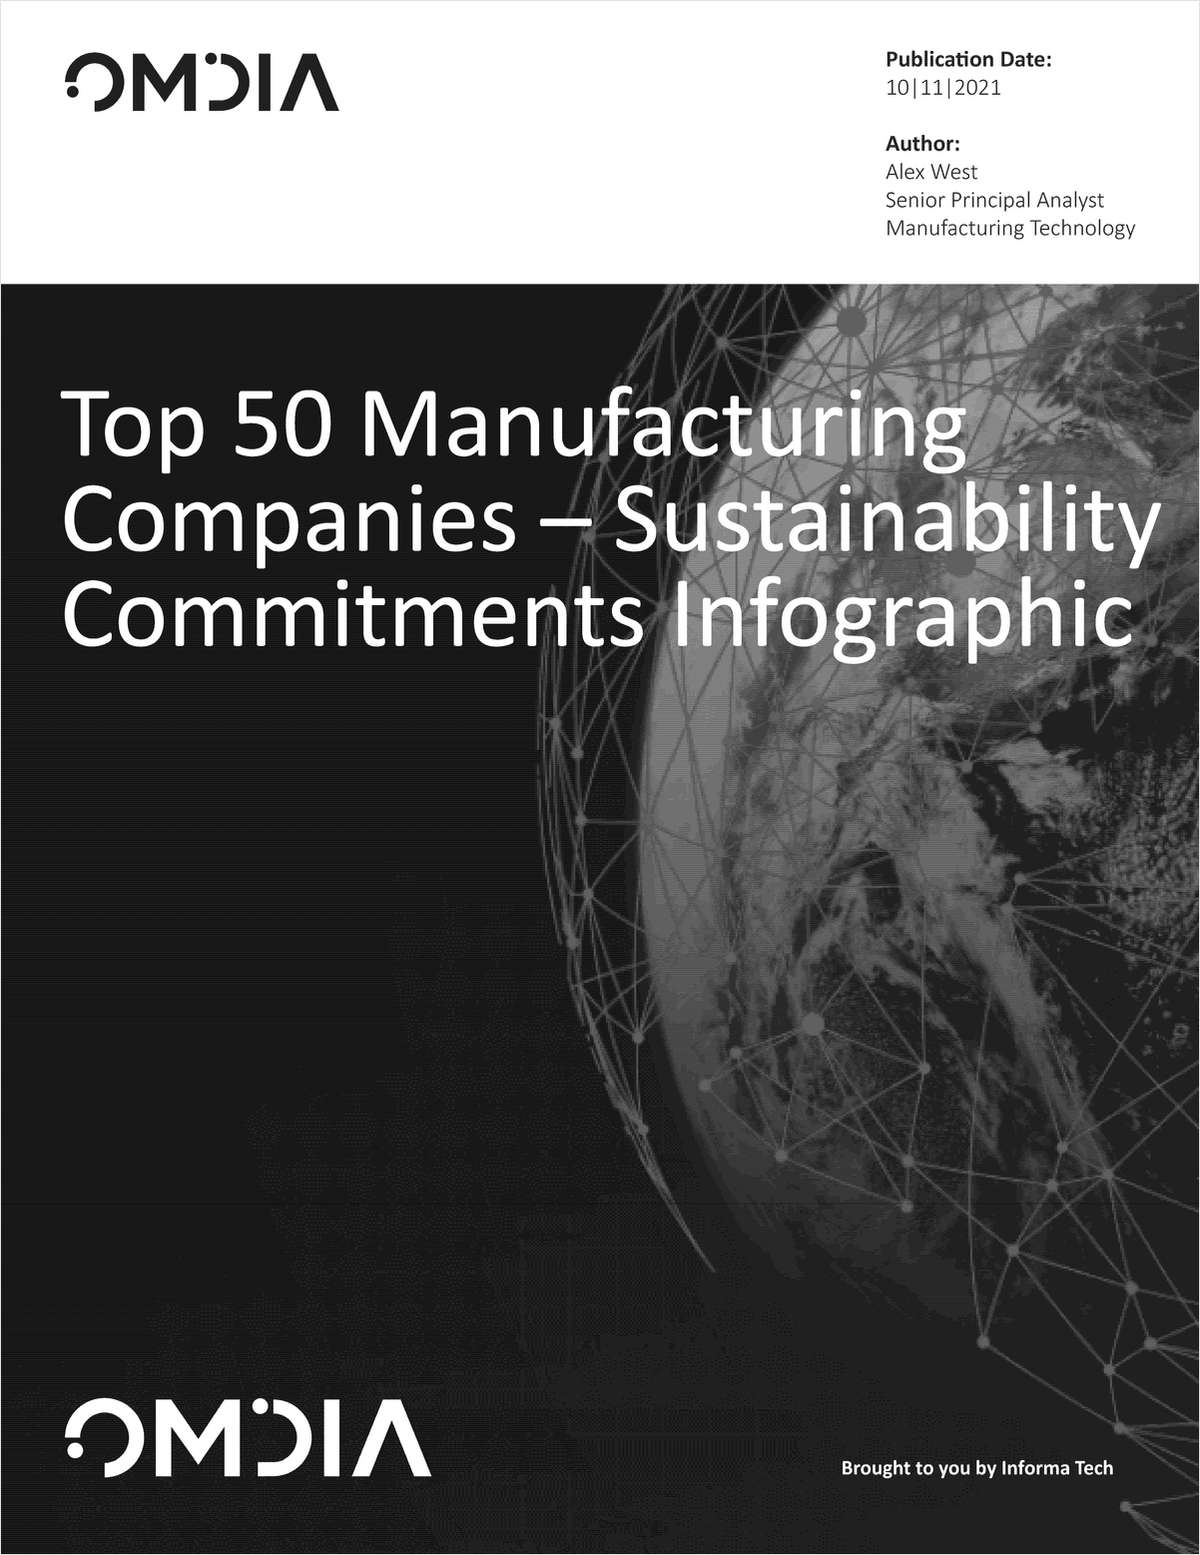 Top 50 Manufacturing Companies -- Sustainability Targets Infographic